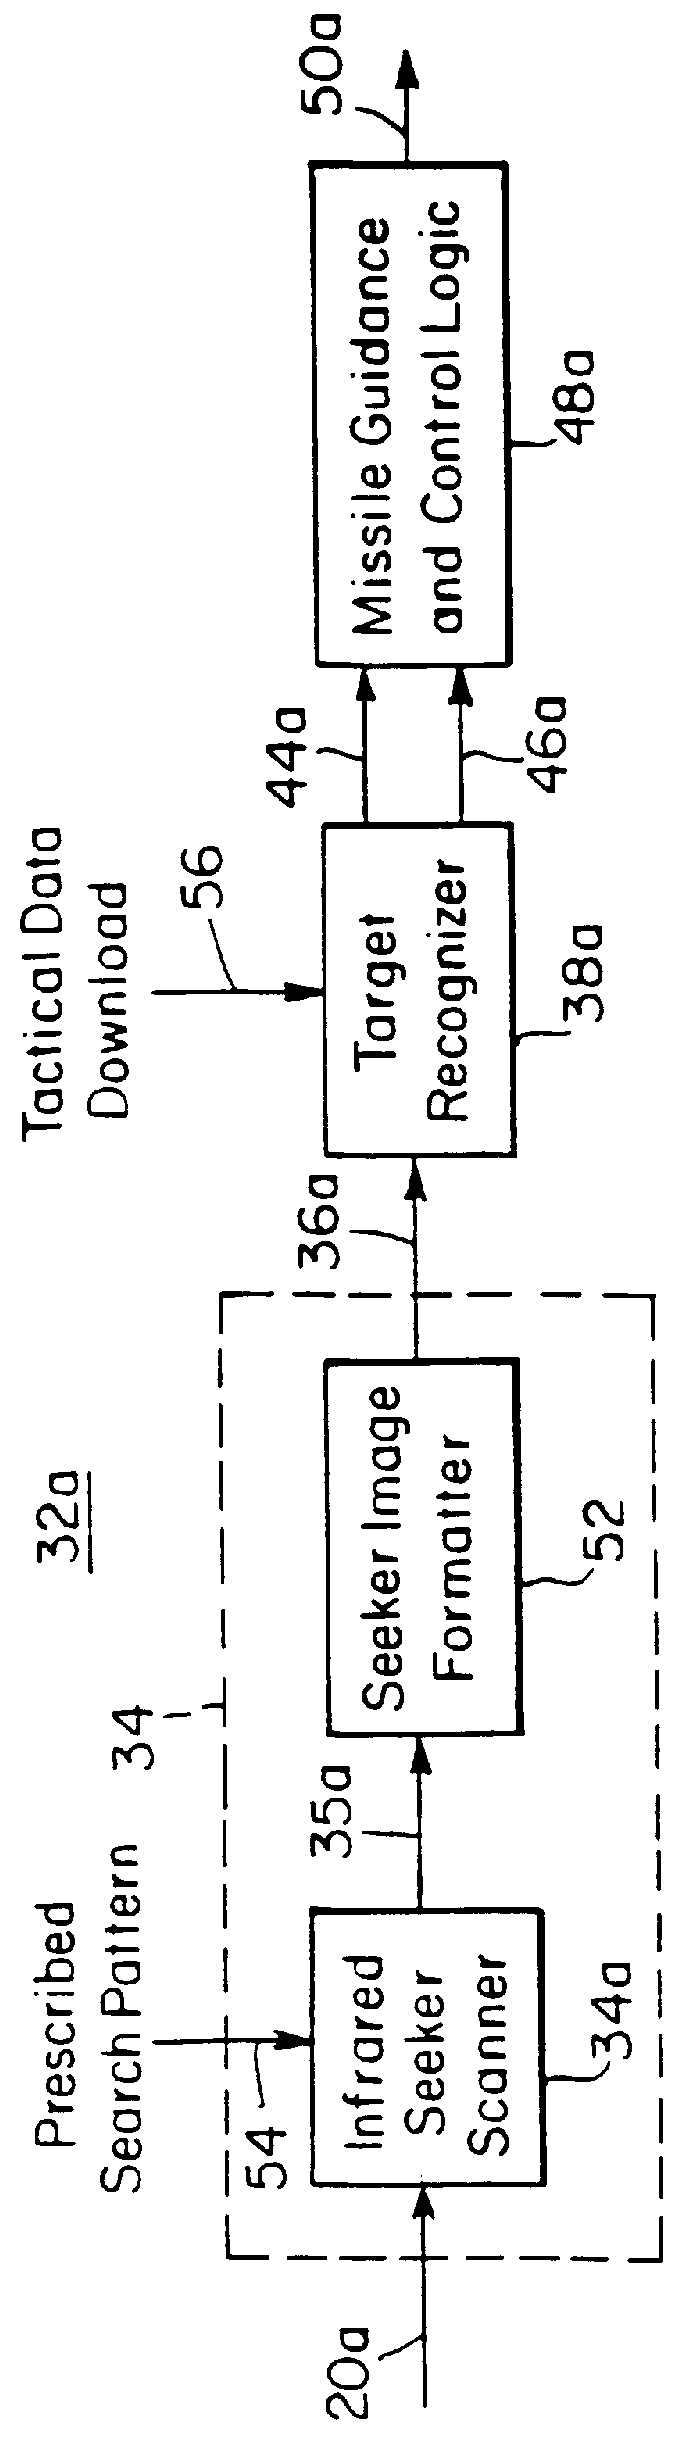 Method and system for imaging target detection